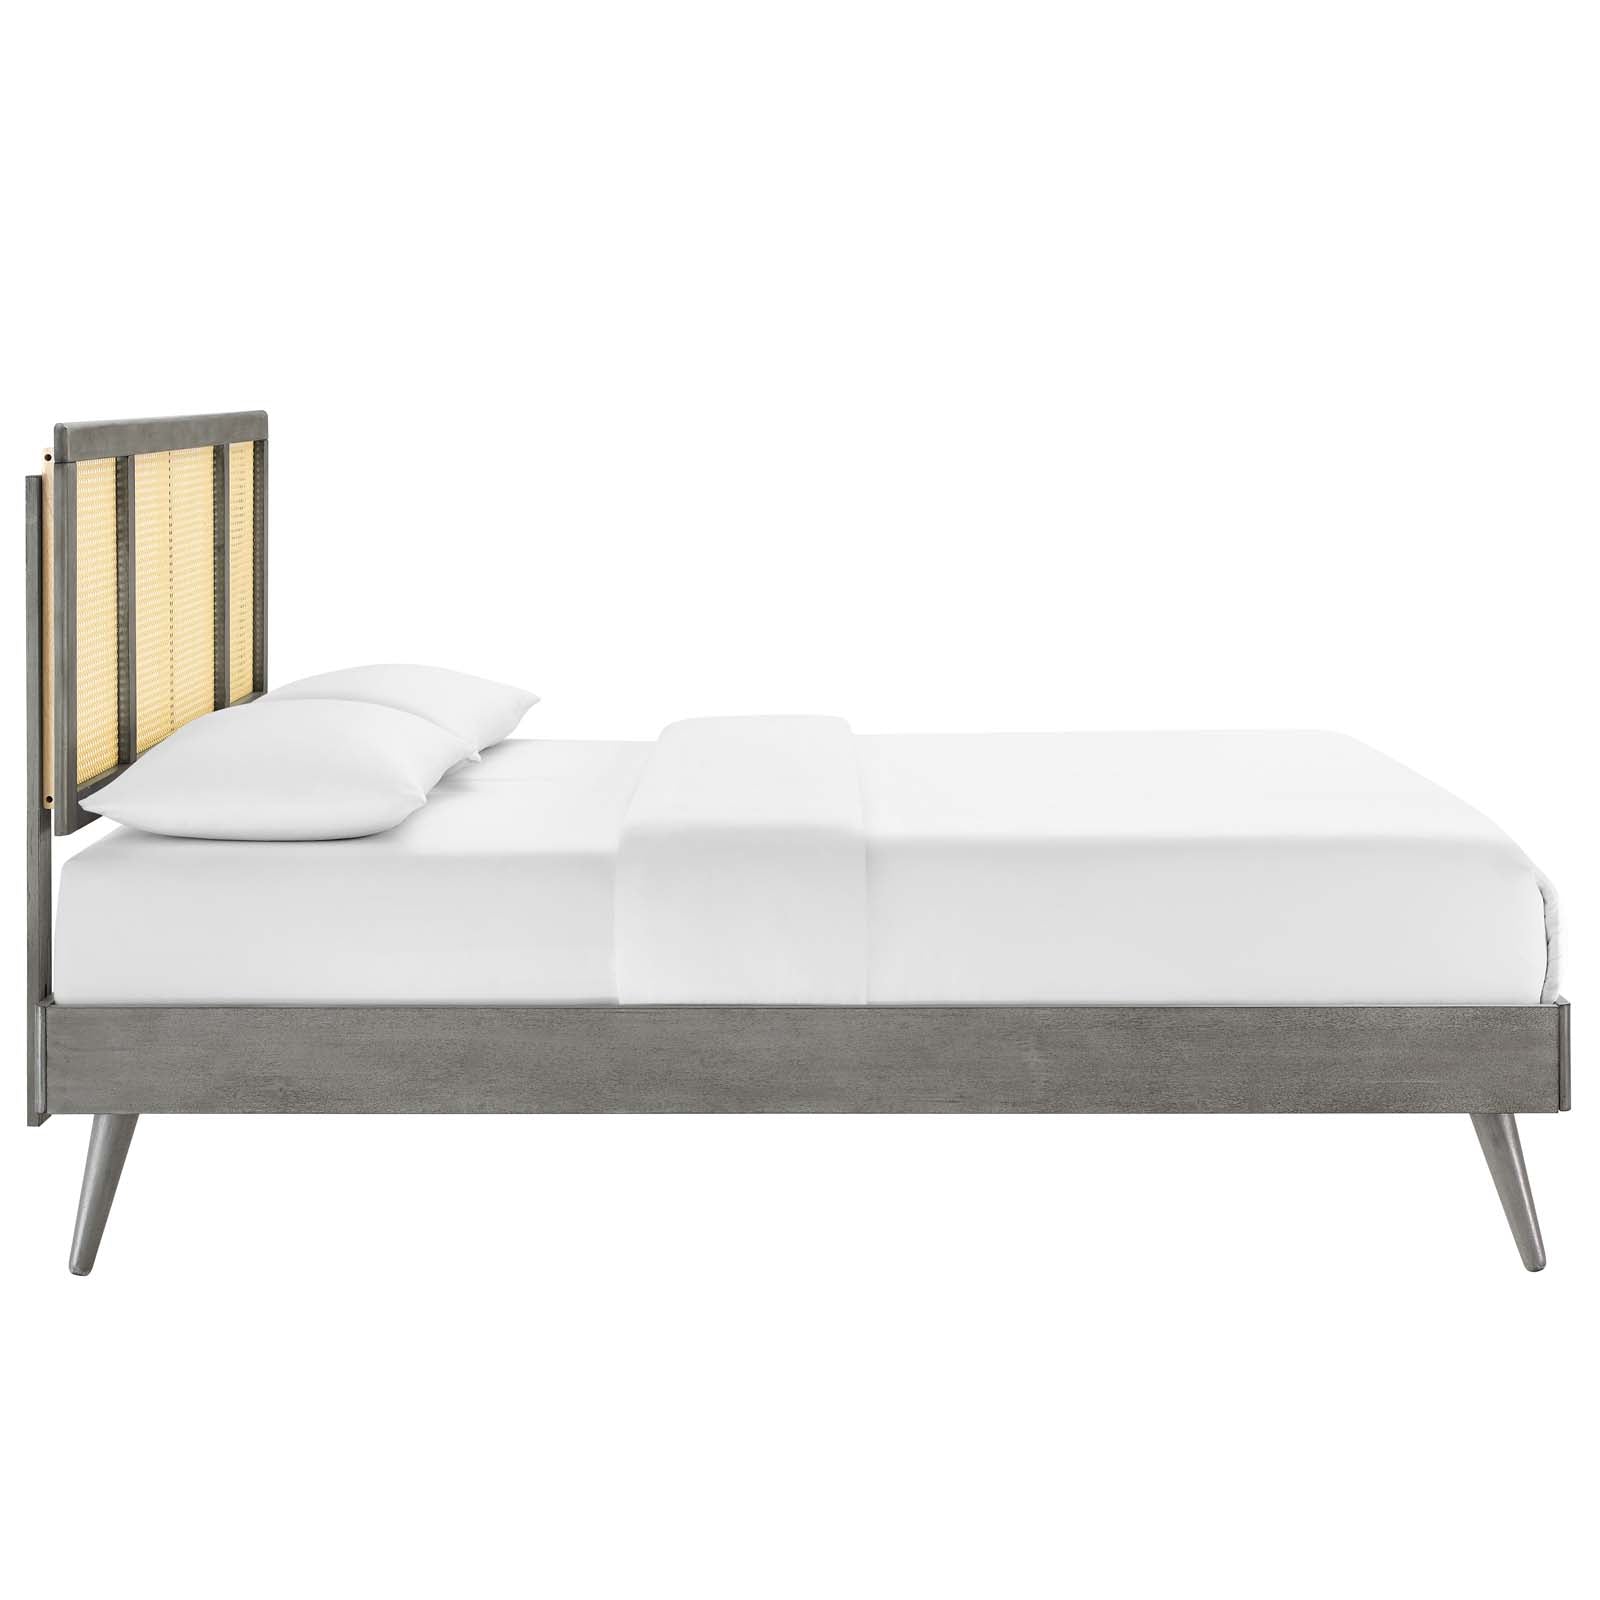 Modway Beds - Kelsea Cane and Wood Full Platform Bed With Splayed Legs Gray